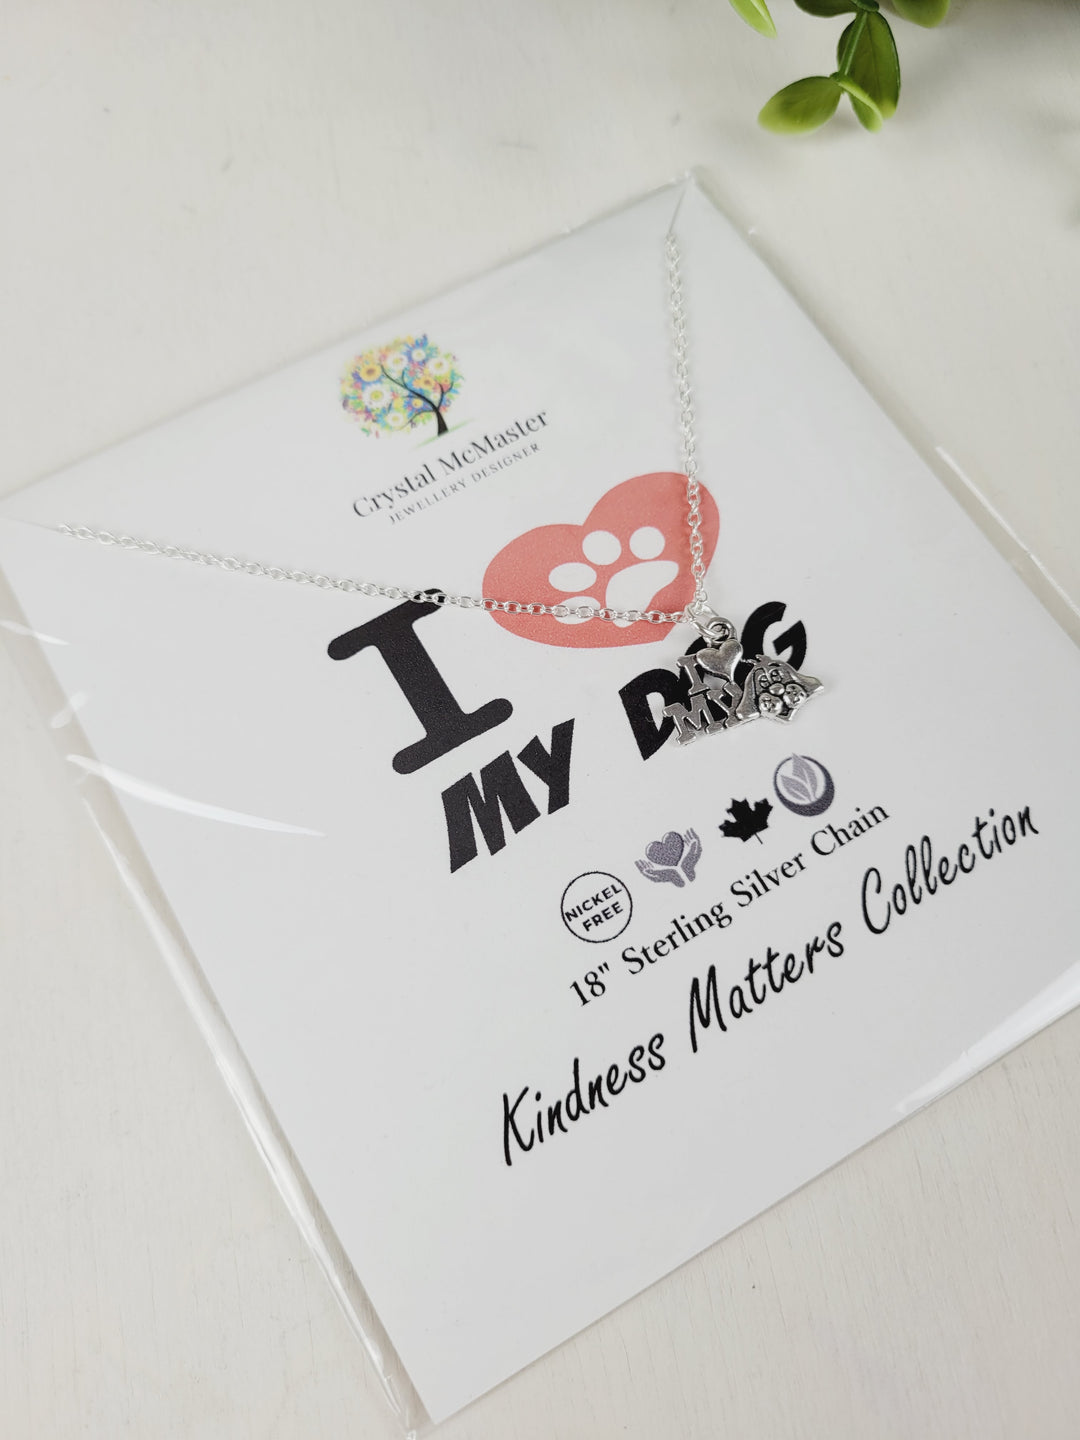 Crystal McMaster Jewellery, Sterling Silver Necklaces- Kindness Matters & Chasing Rainbows Collections